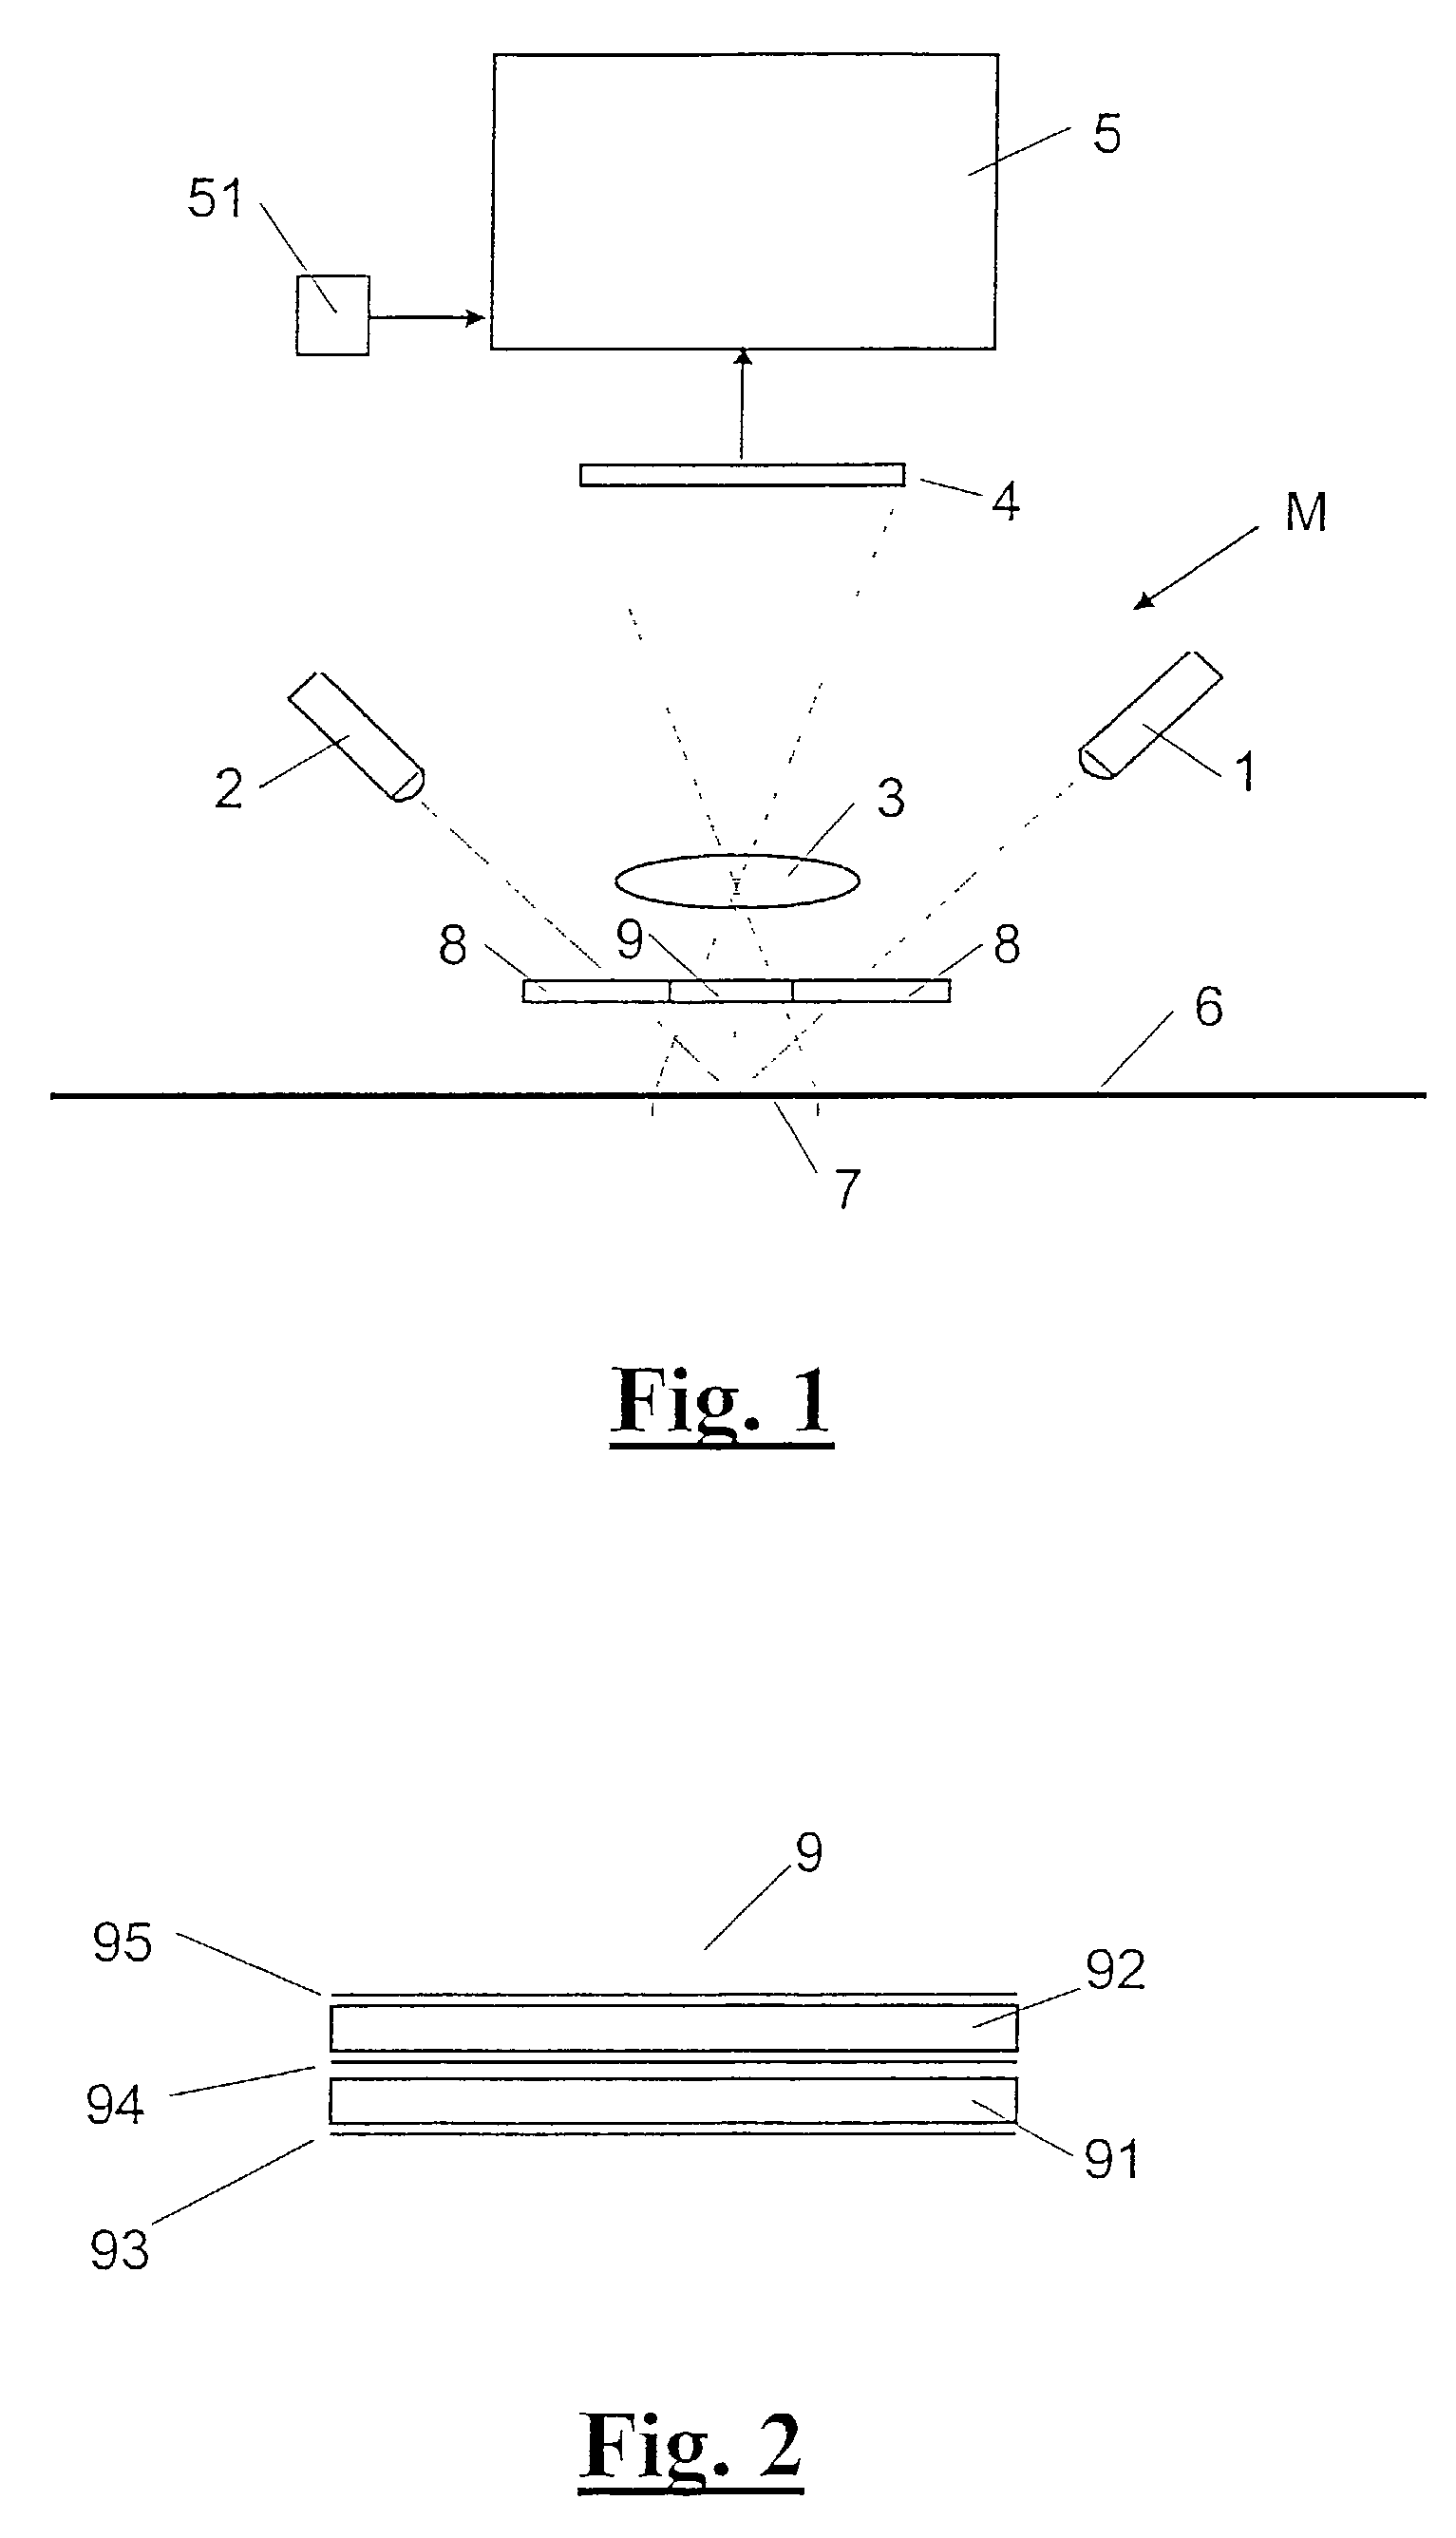 Photoelectric measuring device